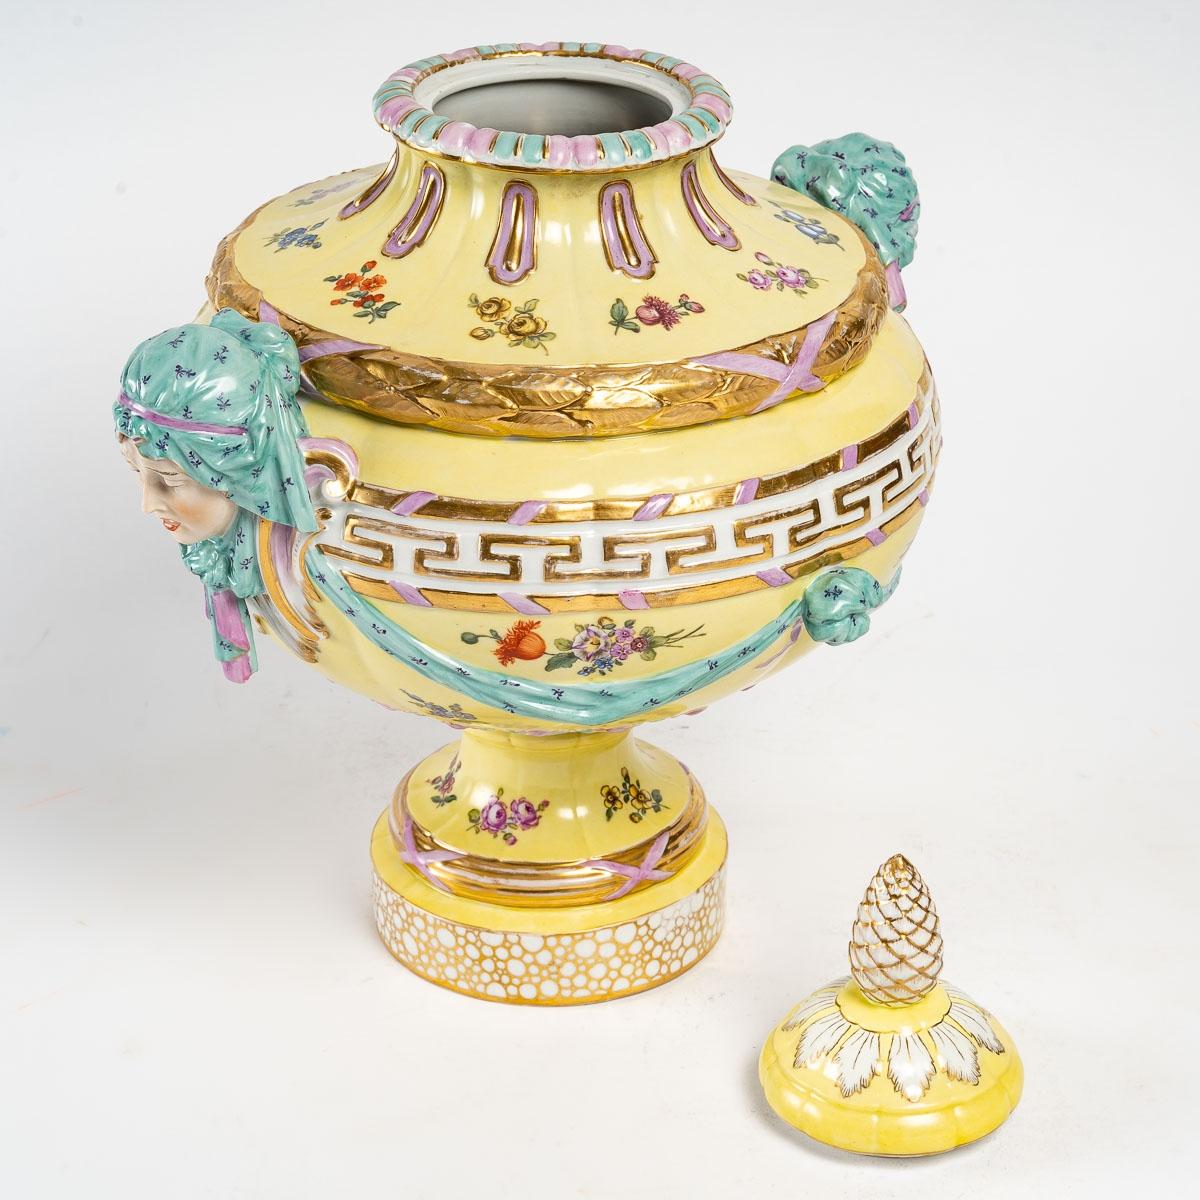 Important Lidded Pot In Berlin Porcelain.

Beautiful Lidded Pot in Berlin Porcelain, Manufacture KPM of the 19th century.

Dimensions: H: 40,5cm, D: 33,5cm.